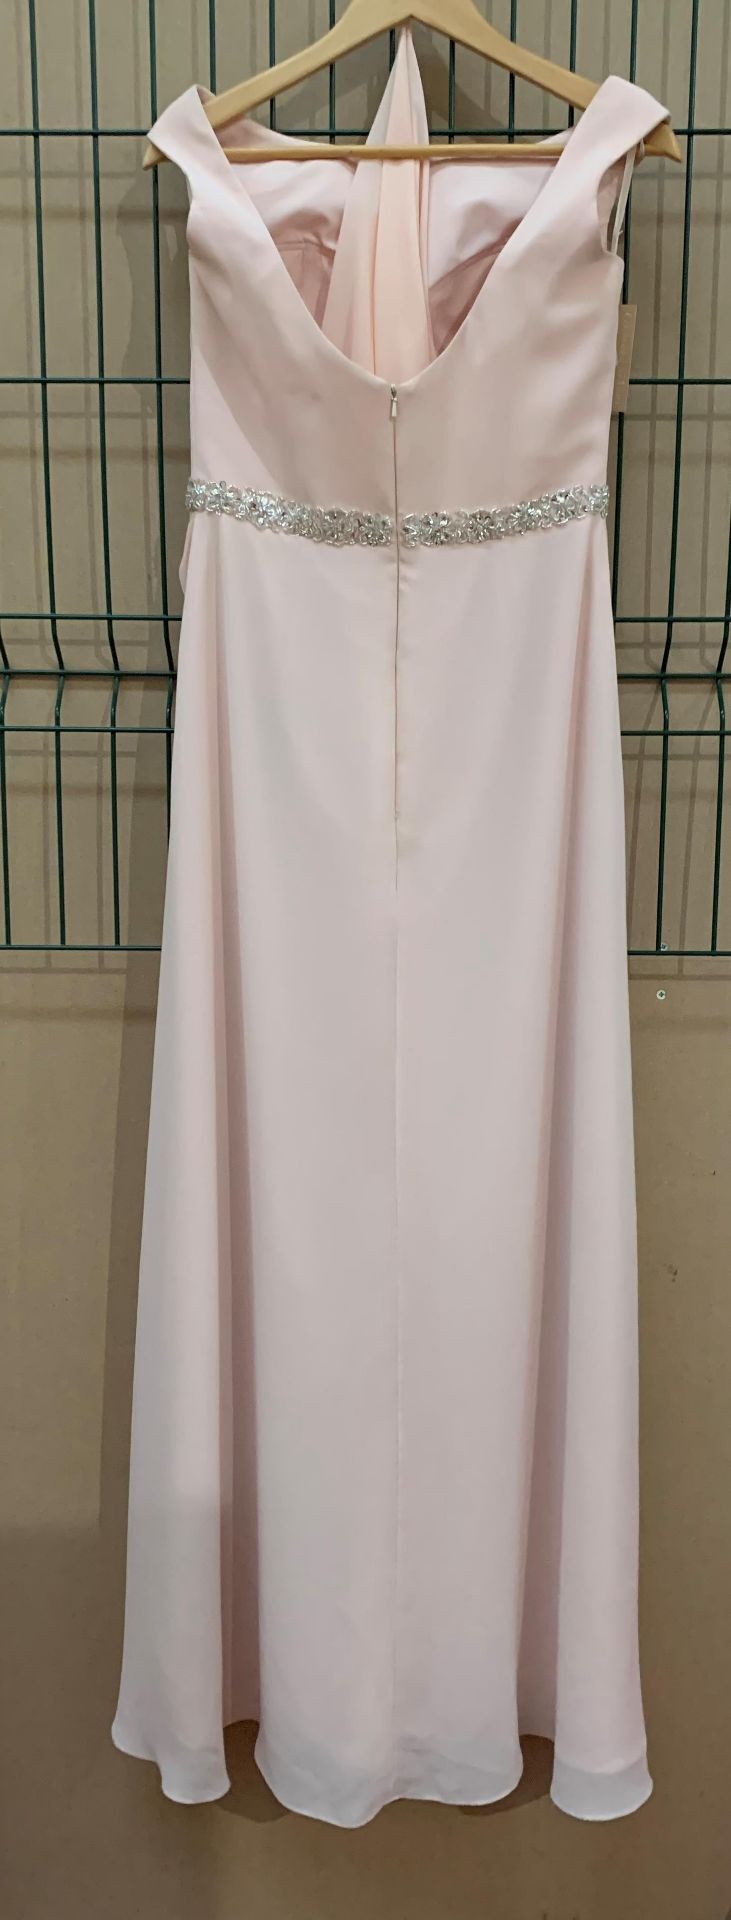 A bridesmaid/prom dress and stole by Serenade, Sigourney, blush, size 12, - Image 2 of 2